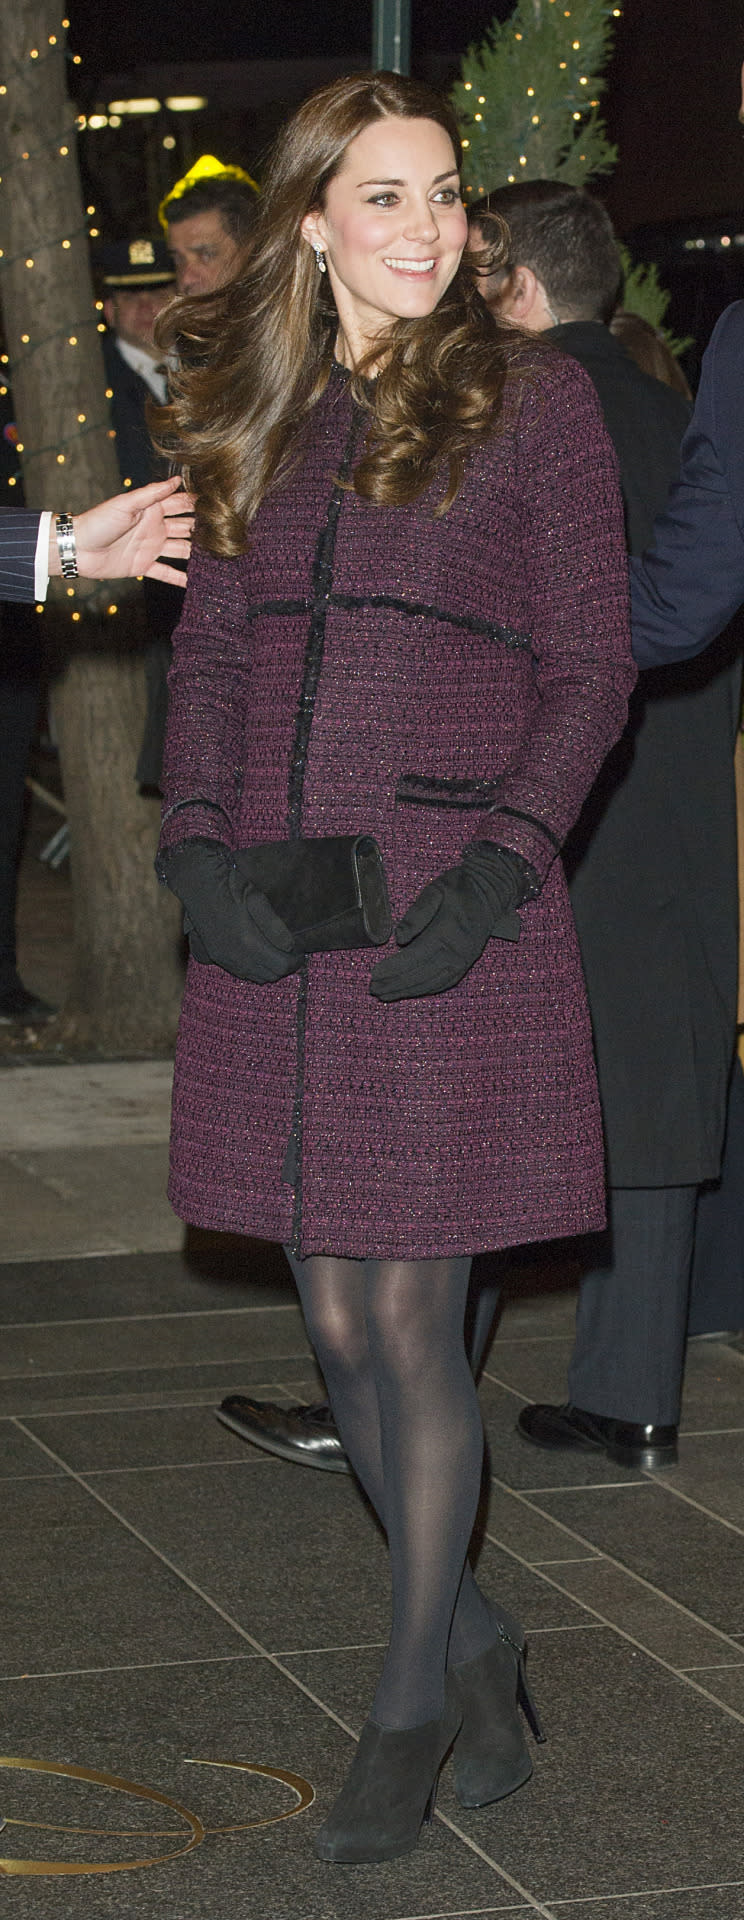 <p>Kate opted for a bouclé coat by Seraphine Maternity for her arrival in New York. She carried a black clutch by Stuart Weitzman and wore black booties and wool gloves from Cornelia James.</p><p><i>[Photo: PA]</i></p>